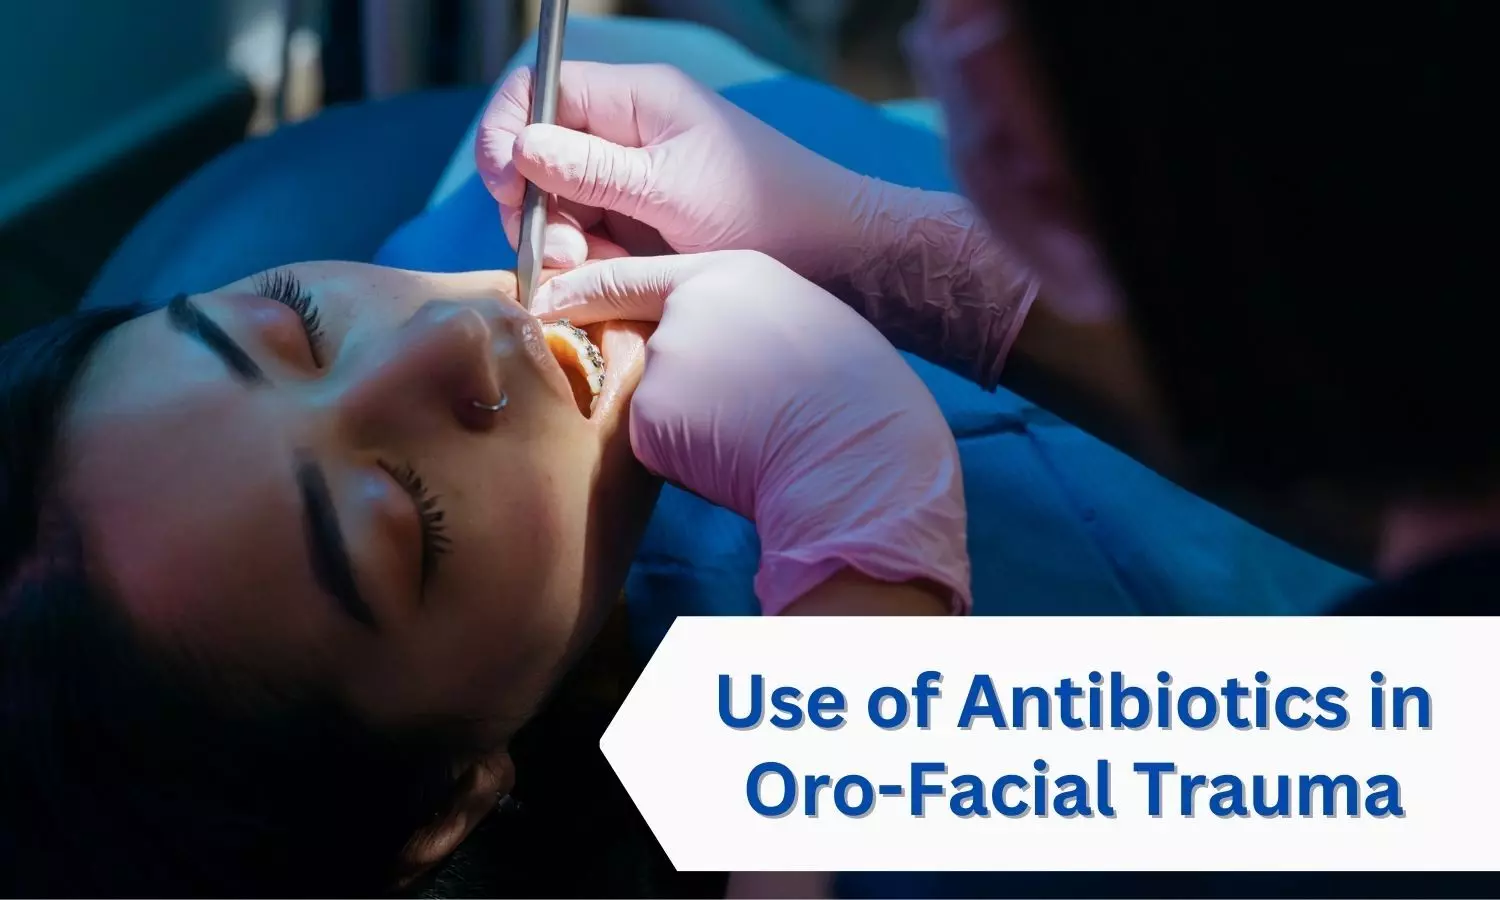 Role Of Systemic Antibiotics in Managing Infection Related to Oro-Facial Trauma